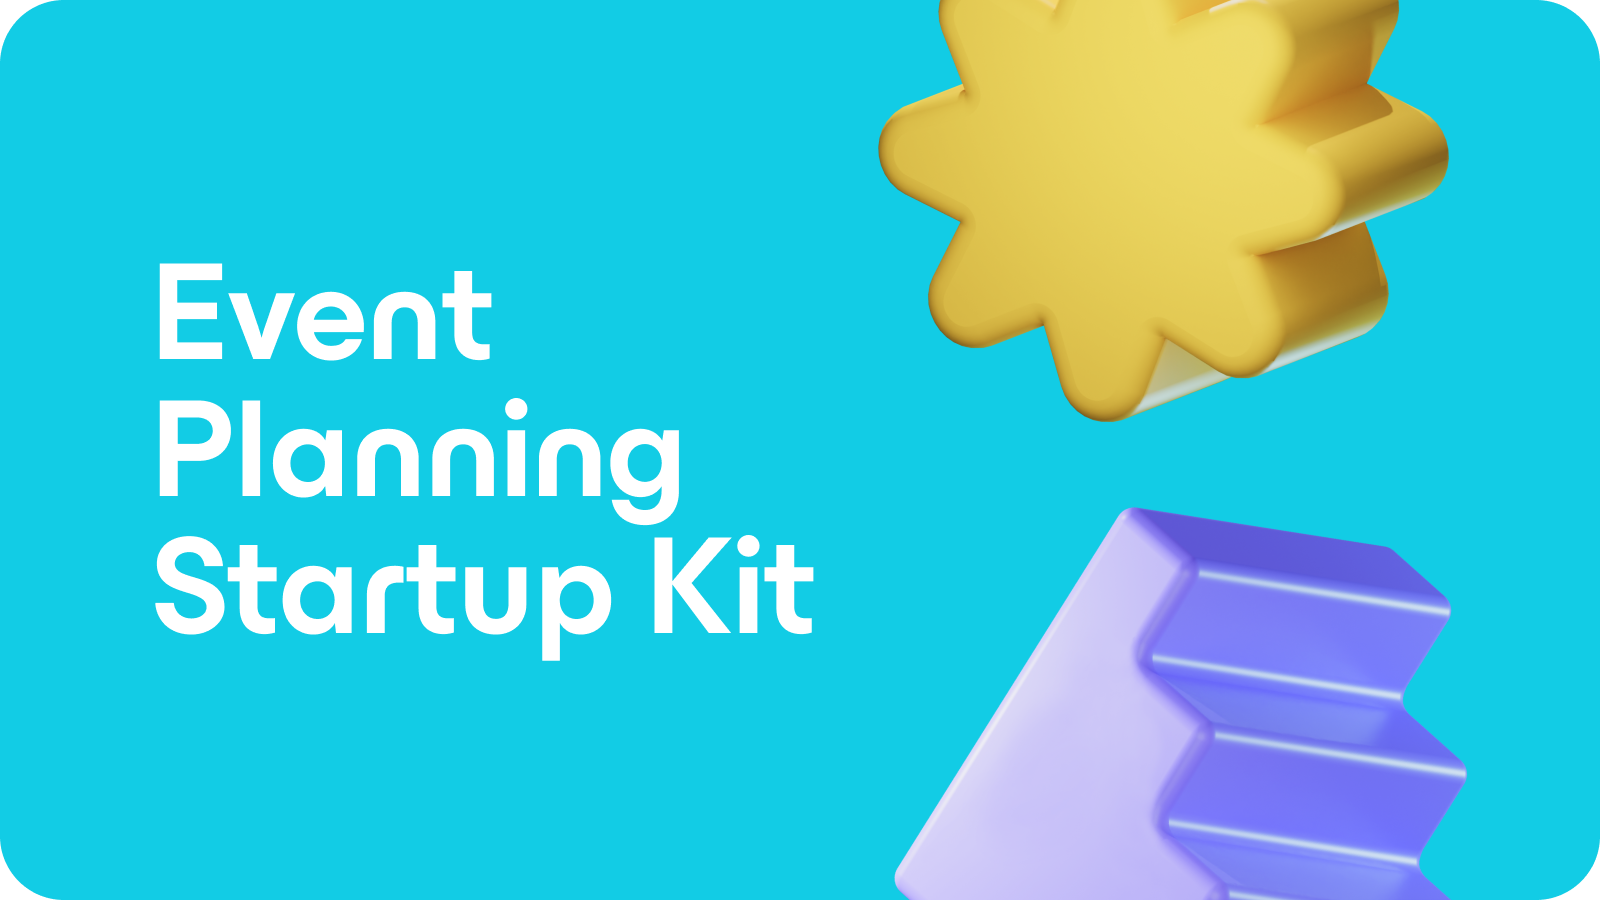 The Event Planning Startup Kit: Everything You Need to Start an Event Planning Business